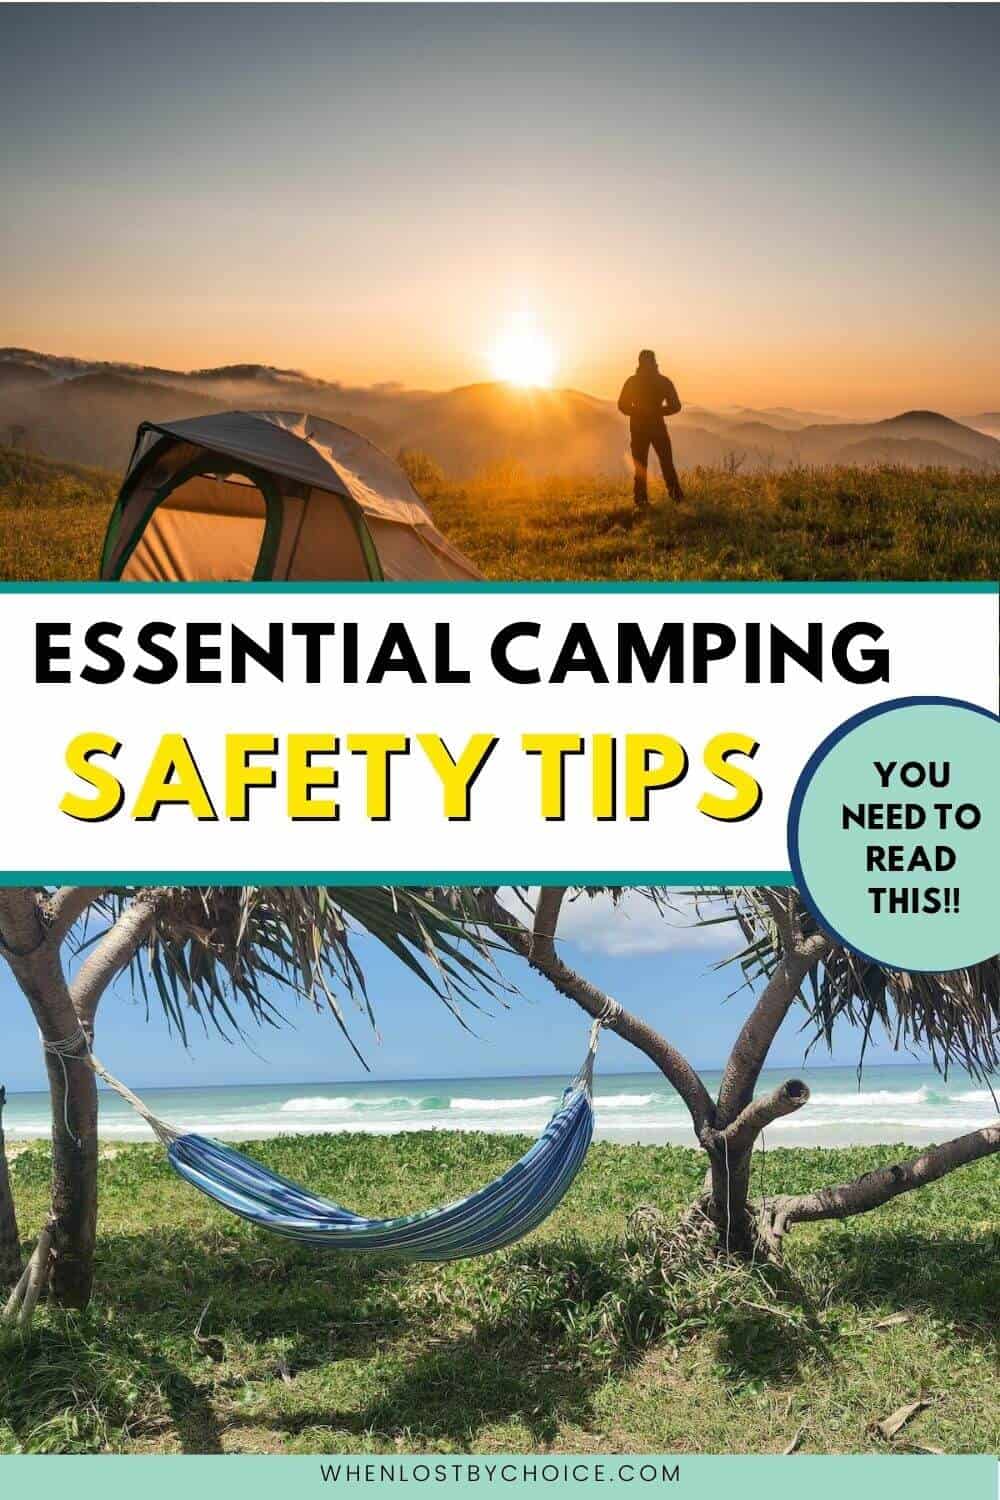 pinterest image - text reads essential camping safety tips you need to read this